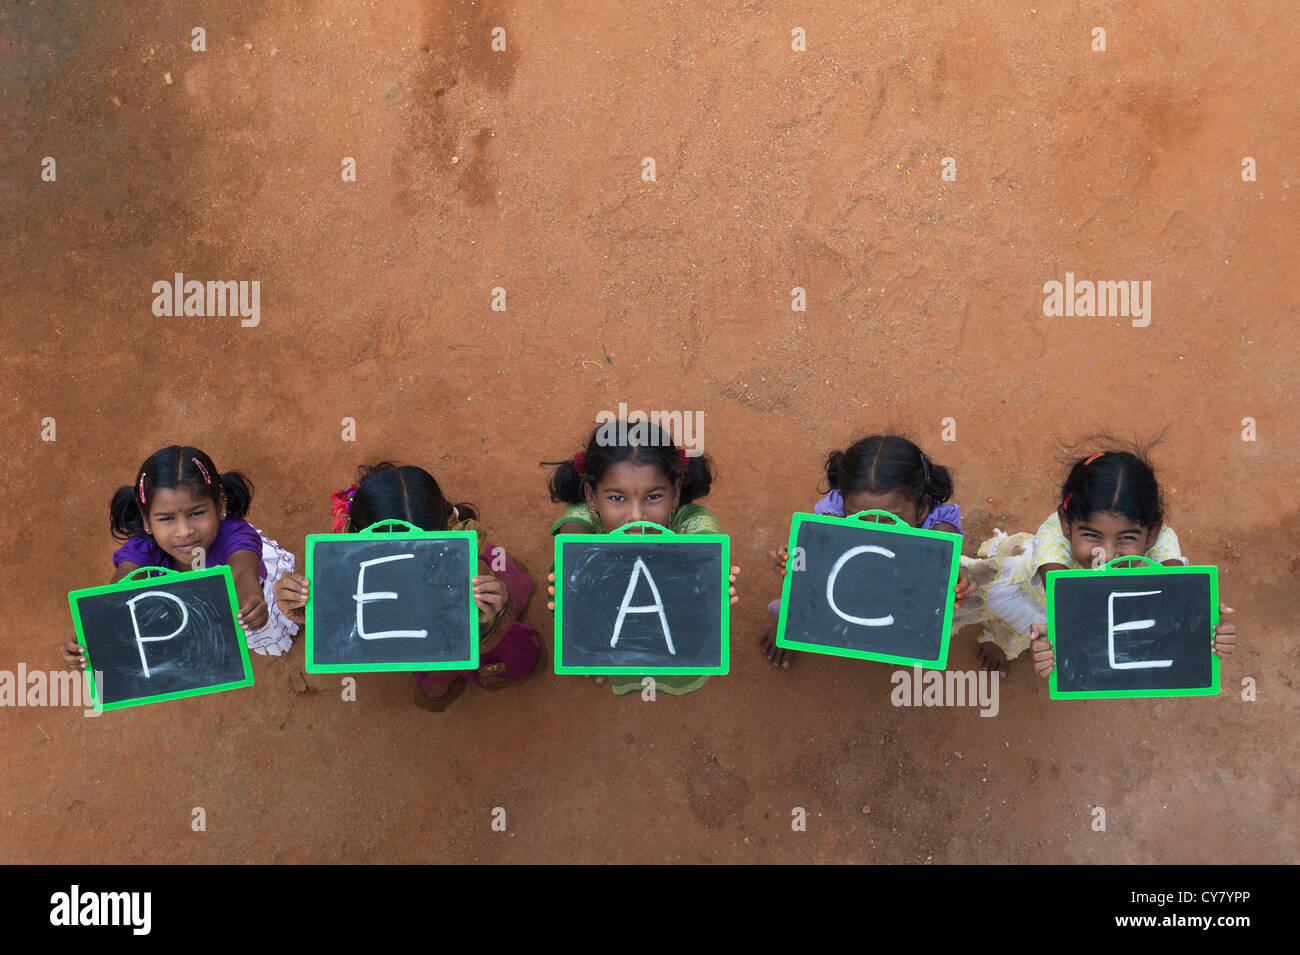 Five Indian village girls with PEACE written on a chalkboard in a rural indian village. Andhra Pradesh, India. Copy space Stock Photo